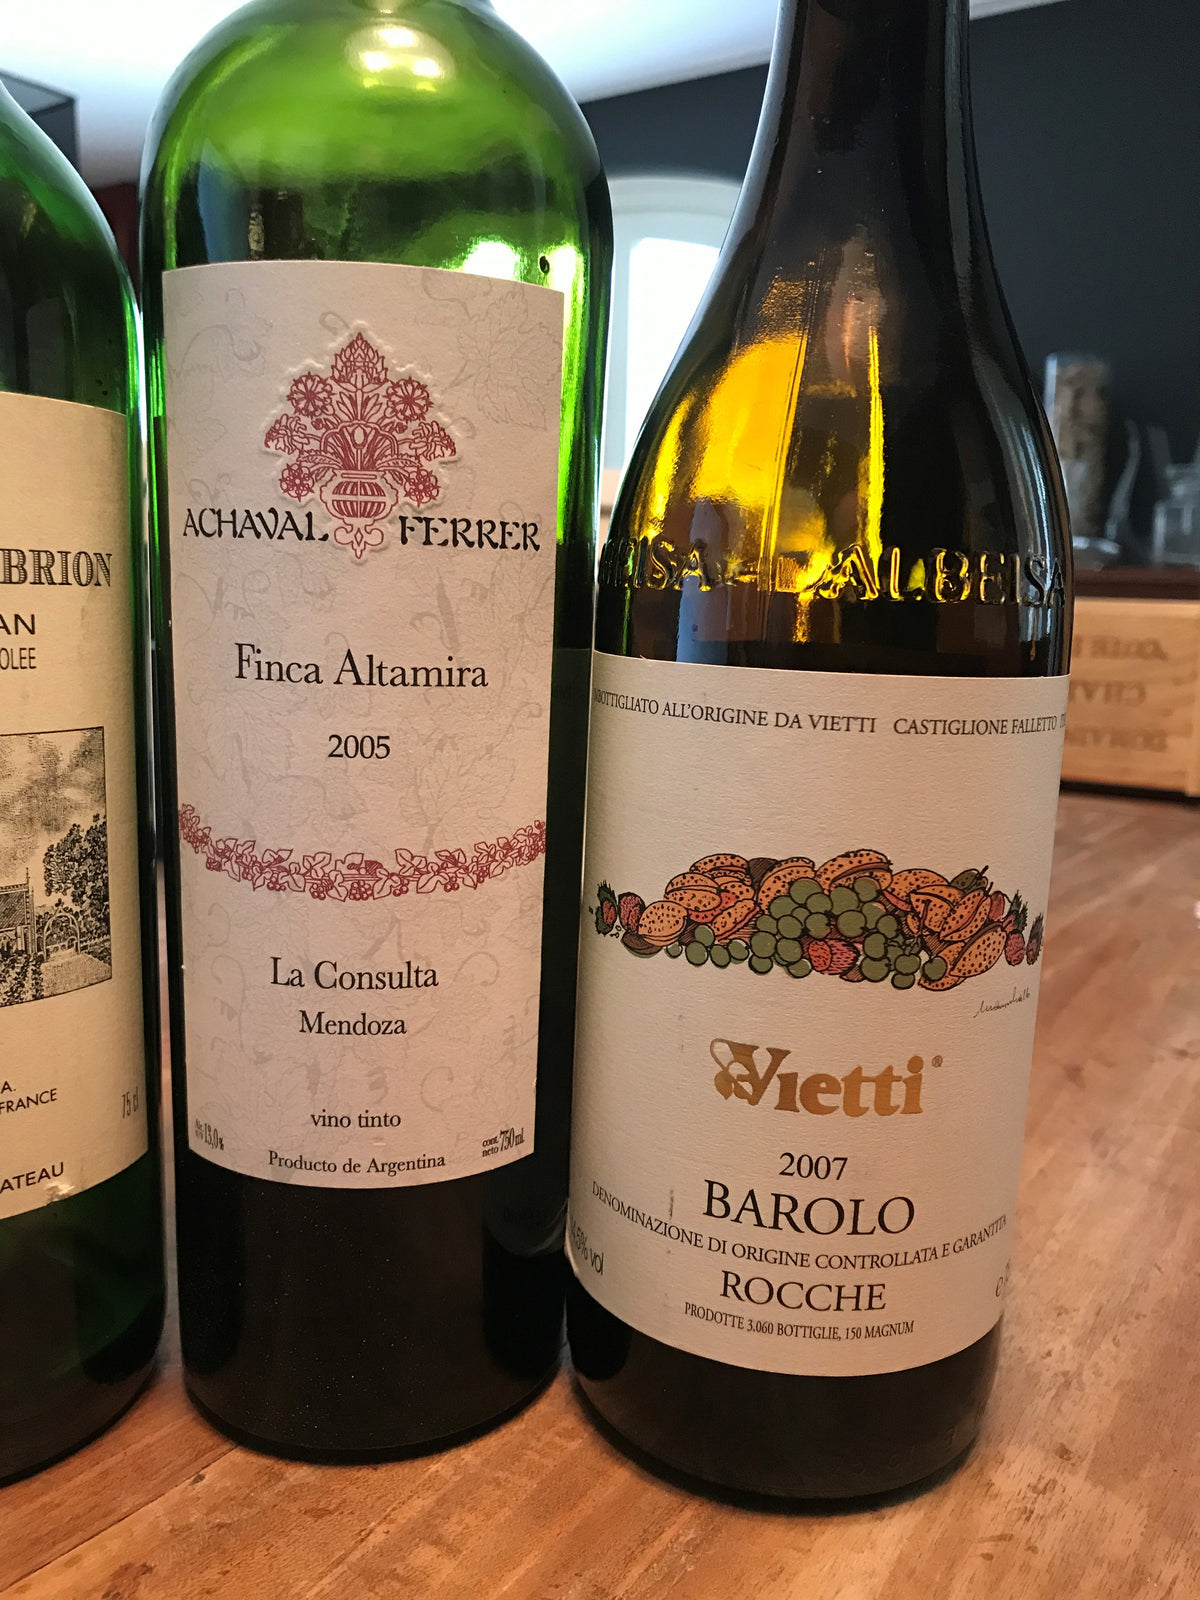 The unsurpassed Vietti Barolo's leaves me with gratitude to this master of Barolo